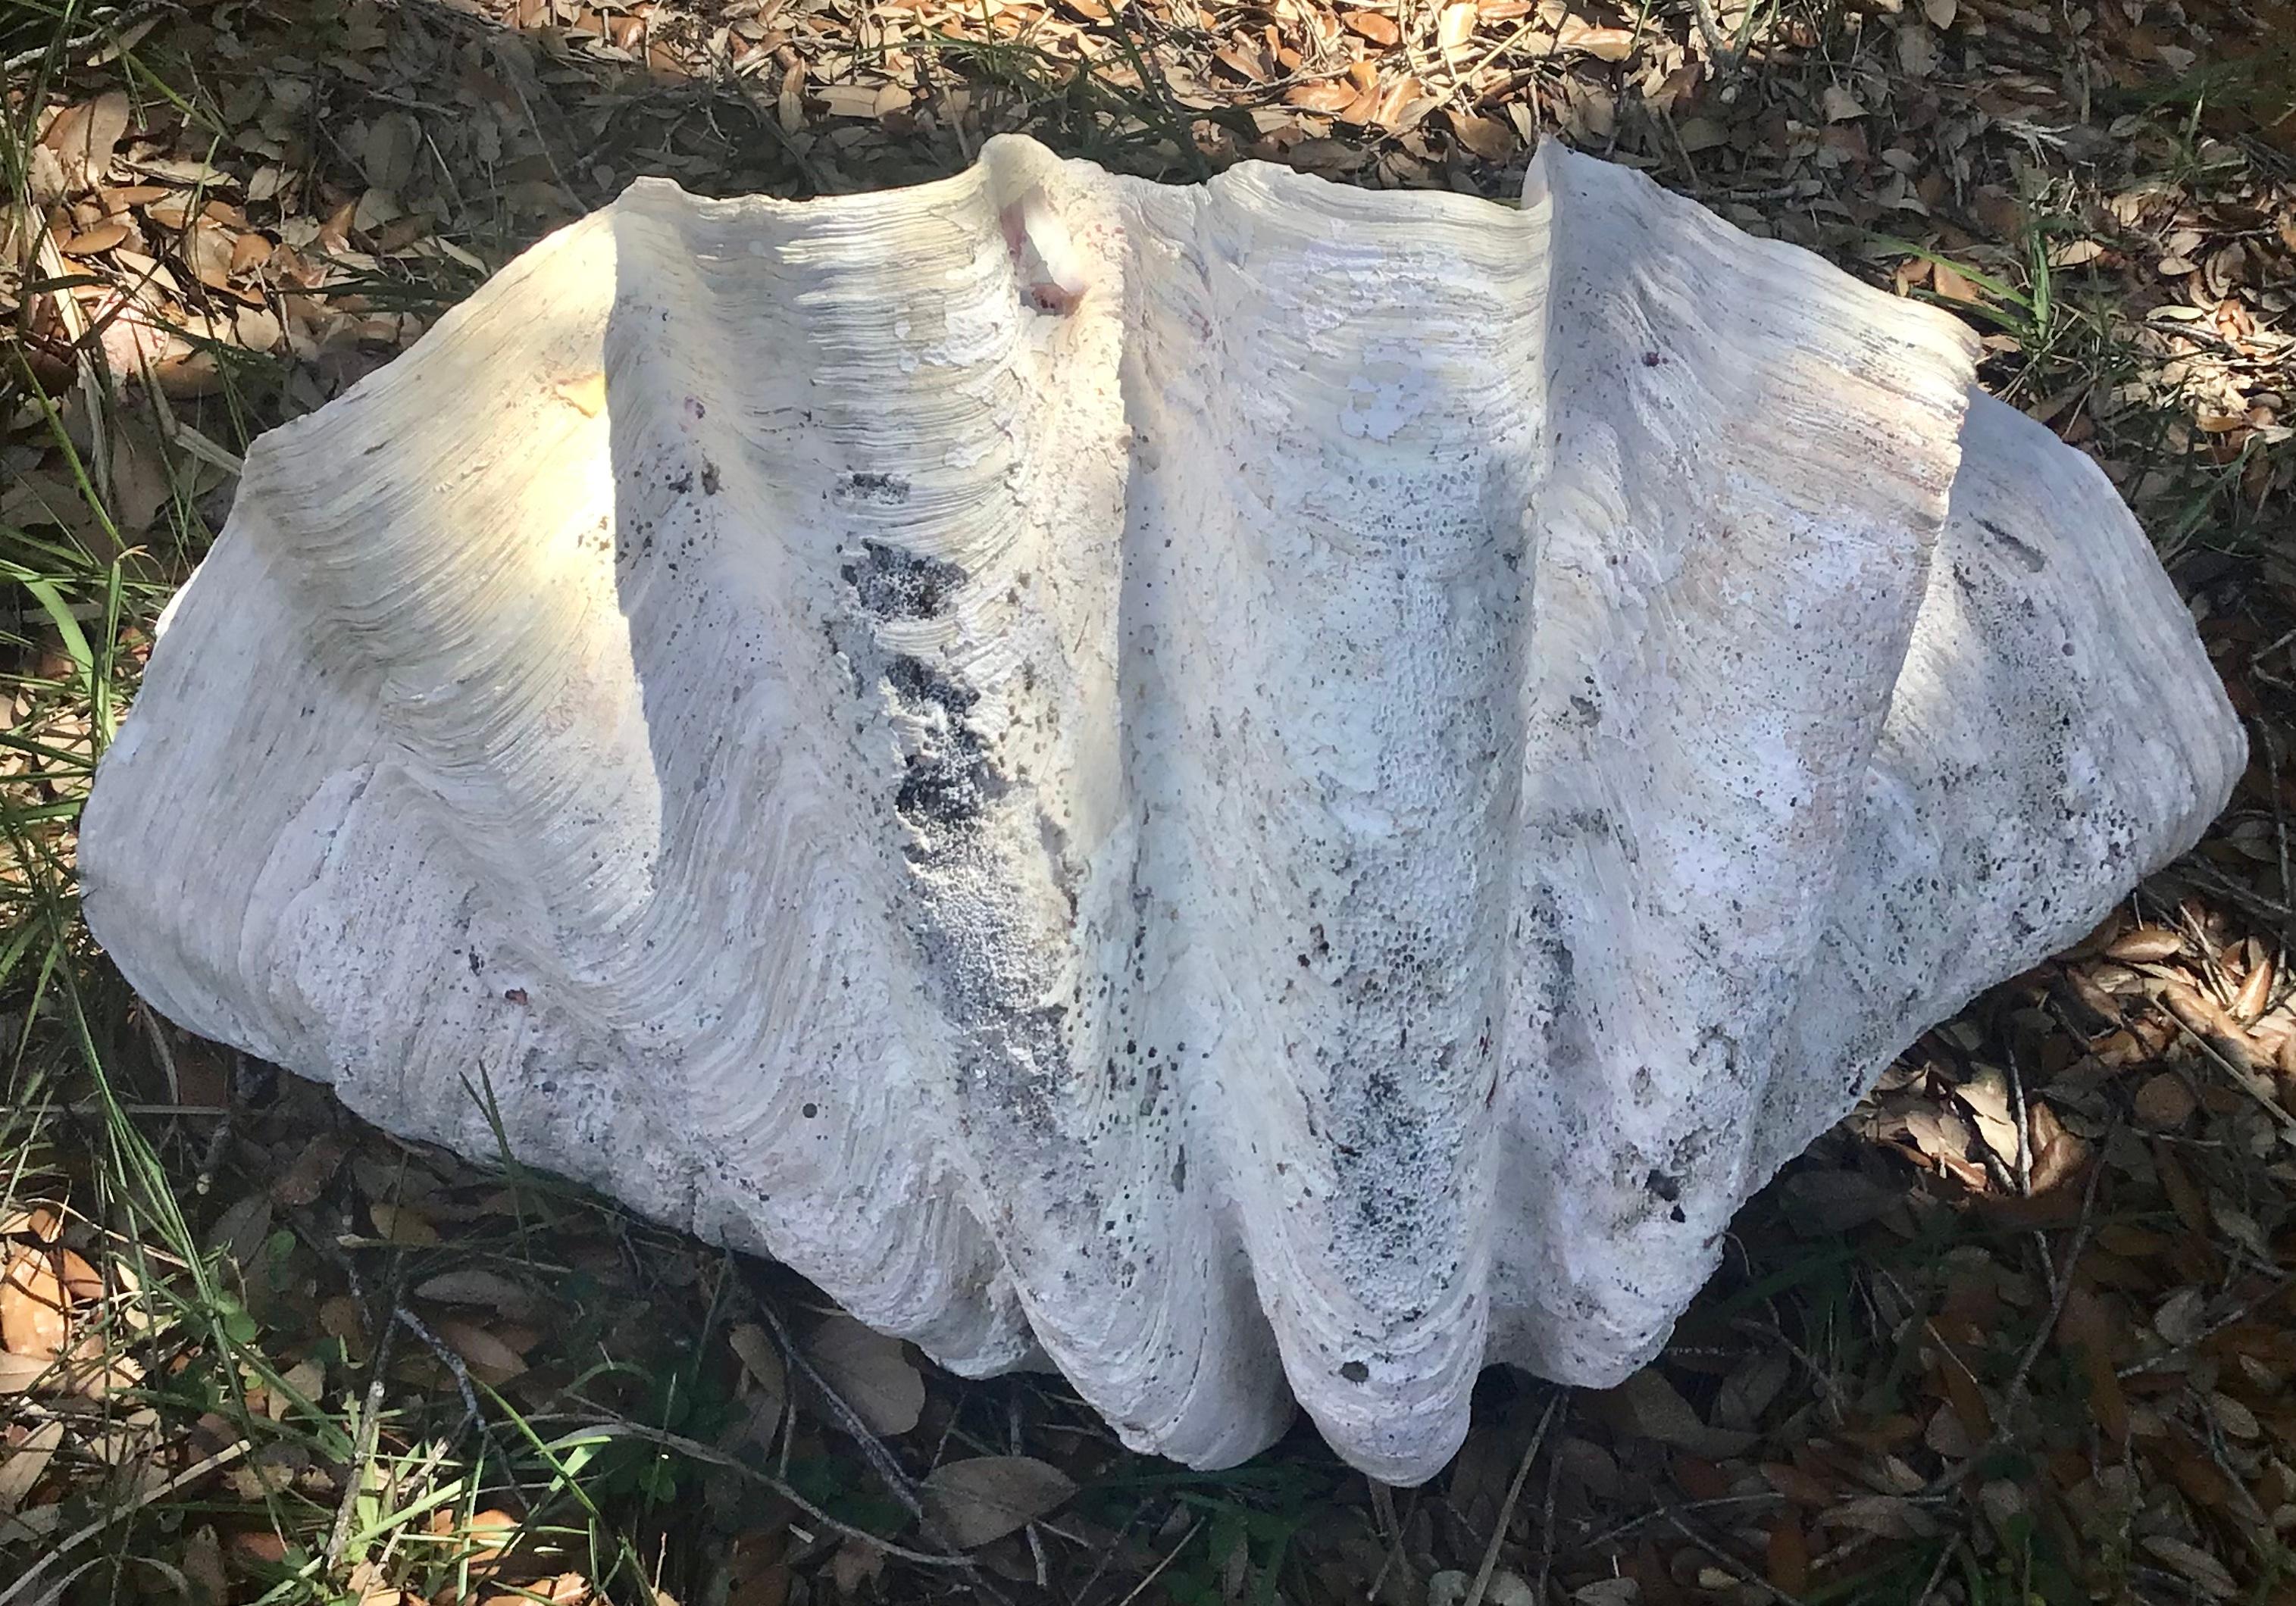 This is a very large, 36 inches, Gorgeous natural giant clam shell specimen from the South Pacific seas. Features a lovely creamy white finish with a soft patina. Great for display. From an estate in Florida.